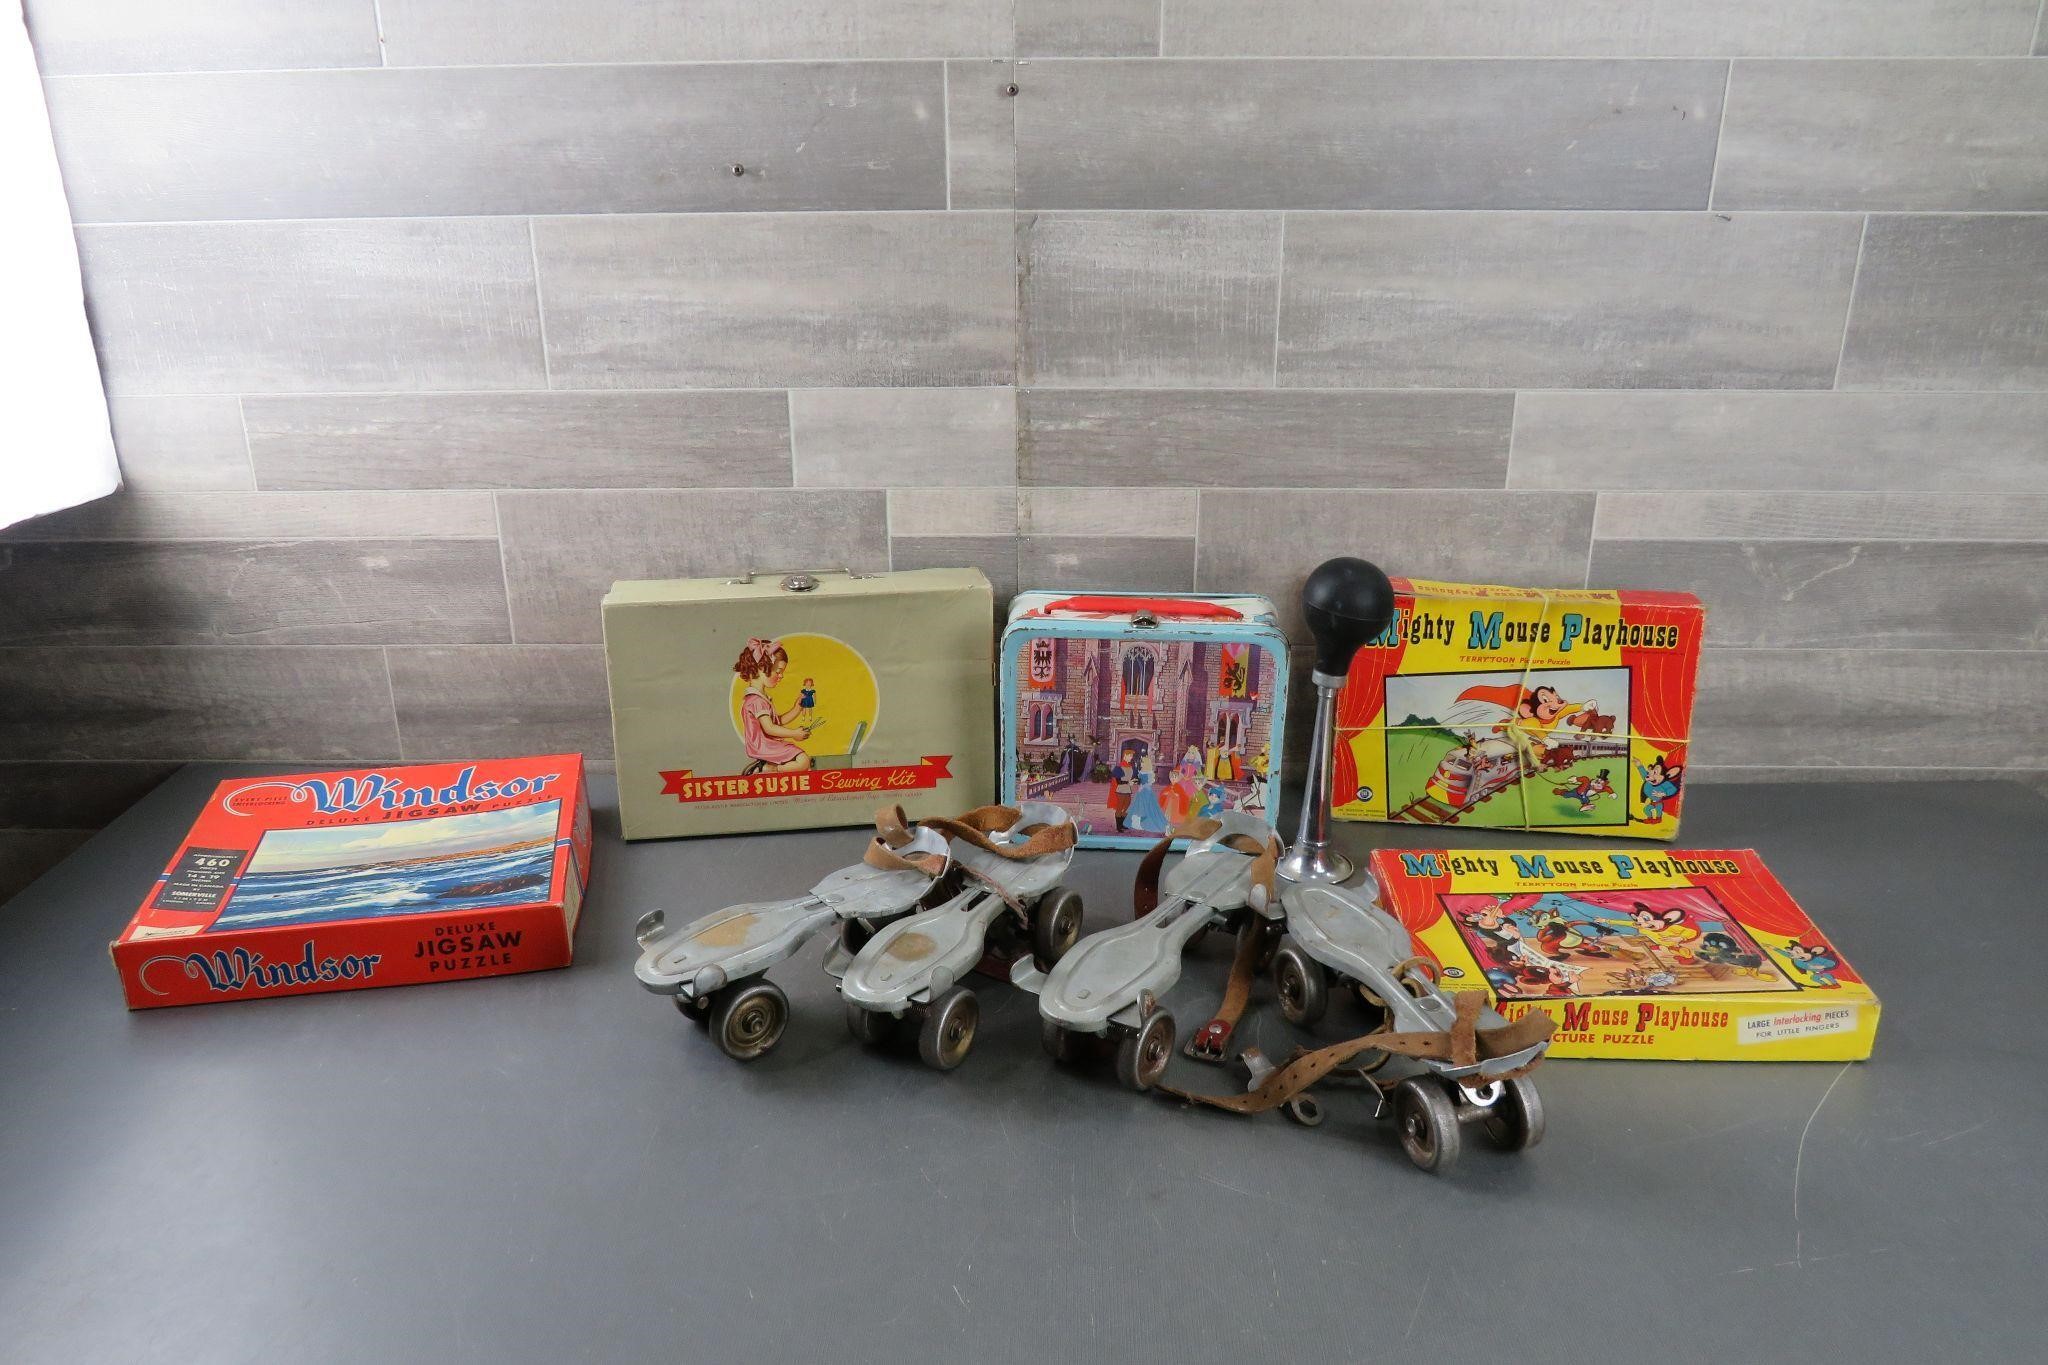 VINTAGE TOYS / SLEEPING BEAUTY LUNCH KIT